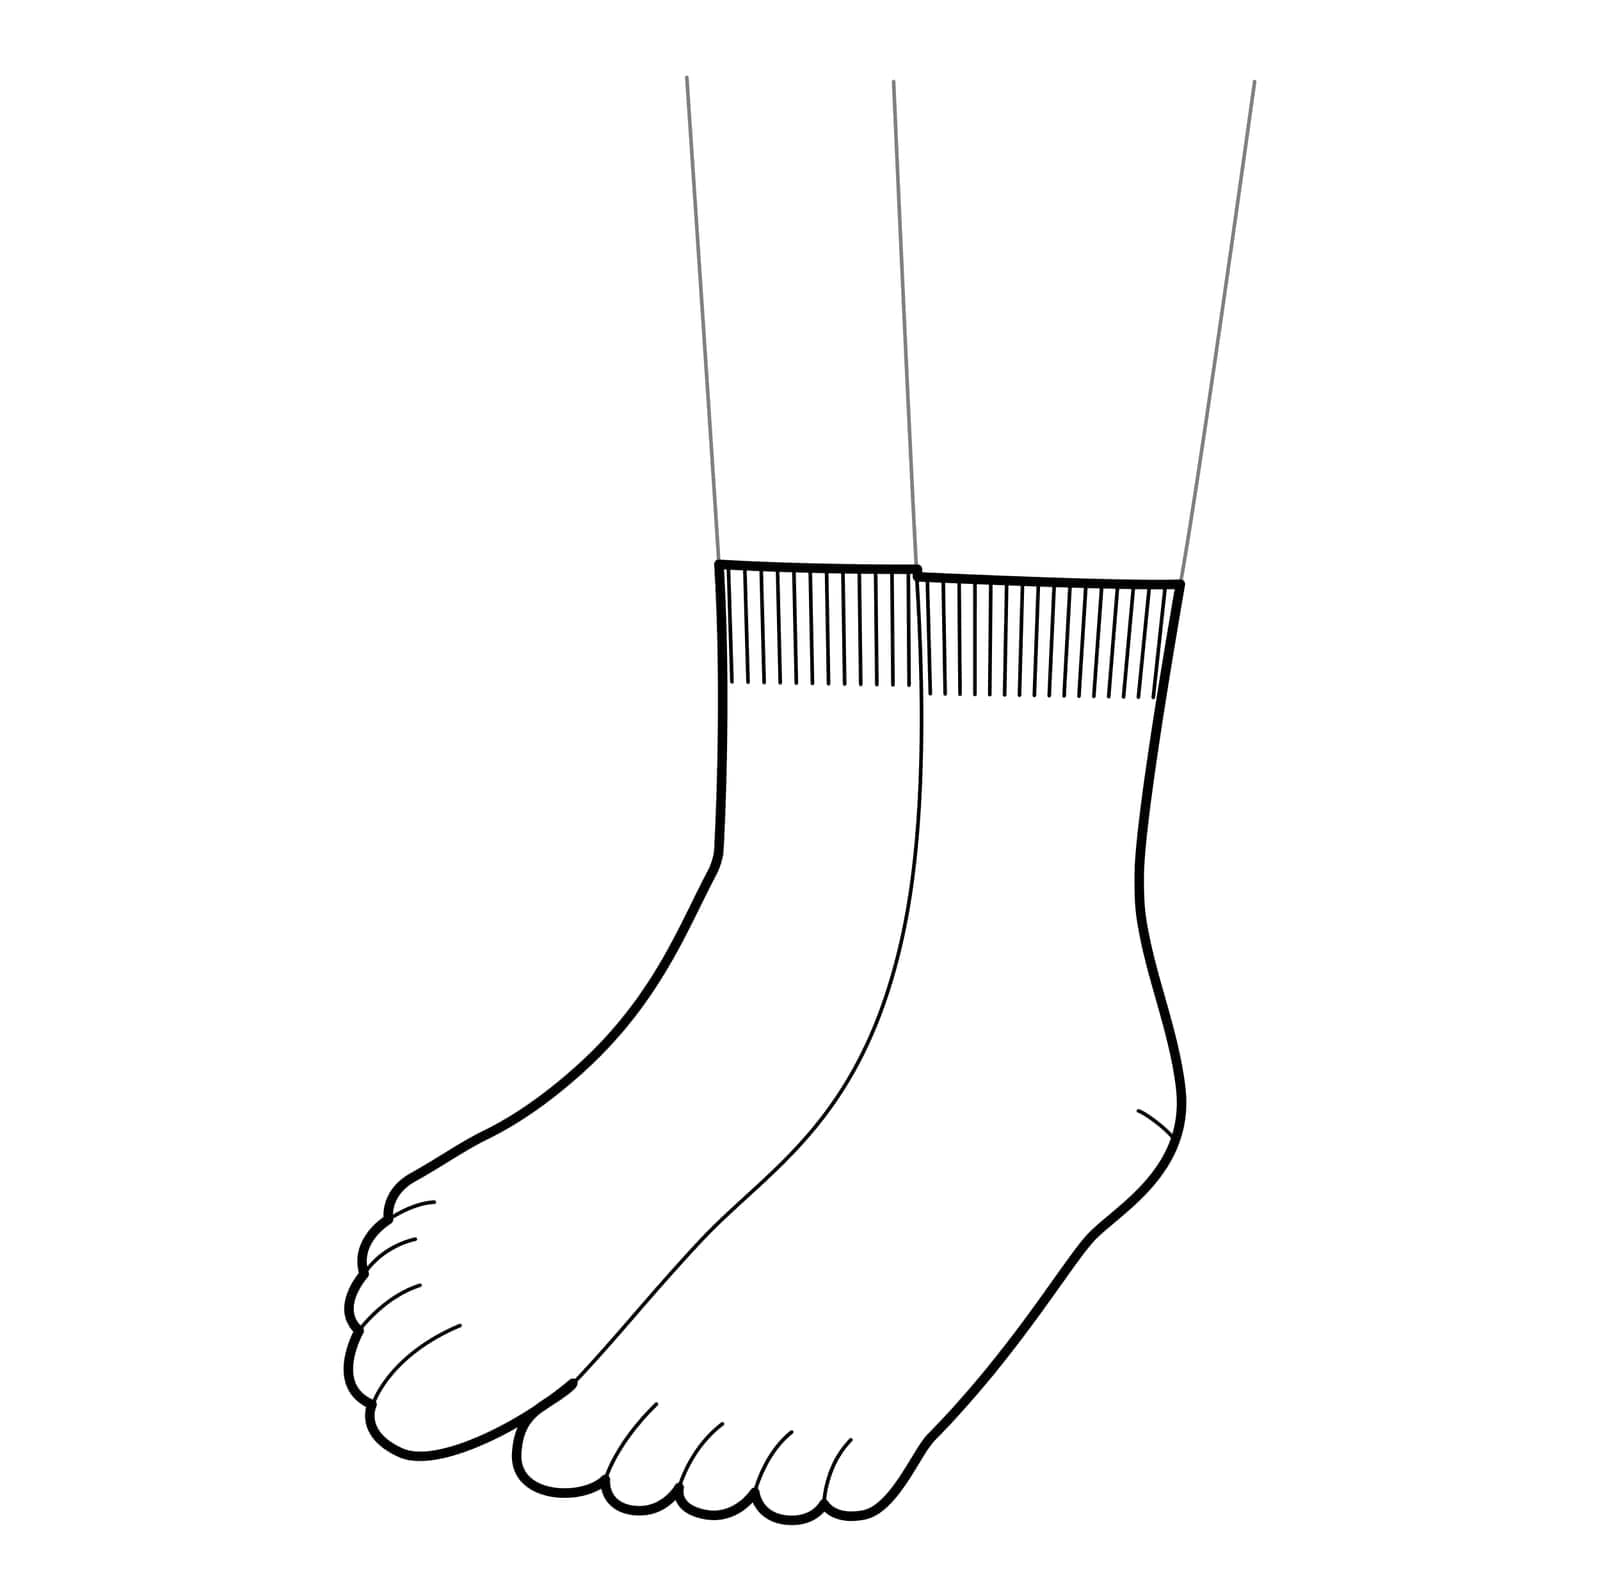 Toe Socks hosiery low cut length. Fashion accessory clothing technical illustration stocking. Vector 3-4 view for Men by Vectoressa